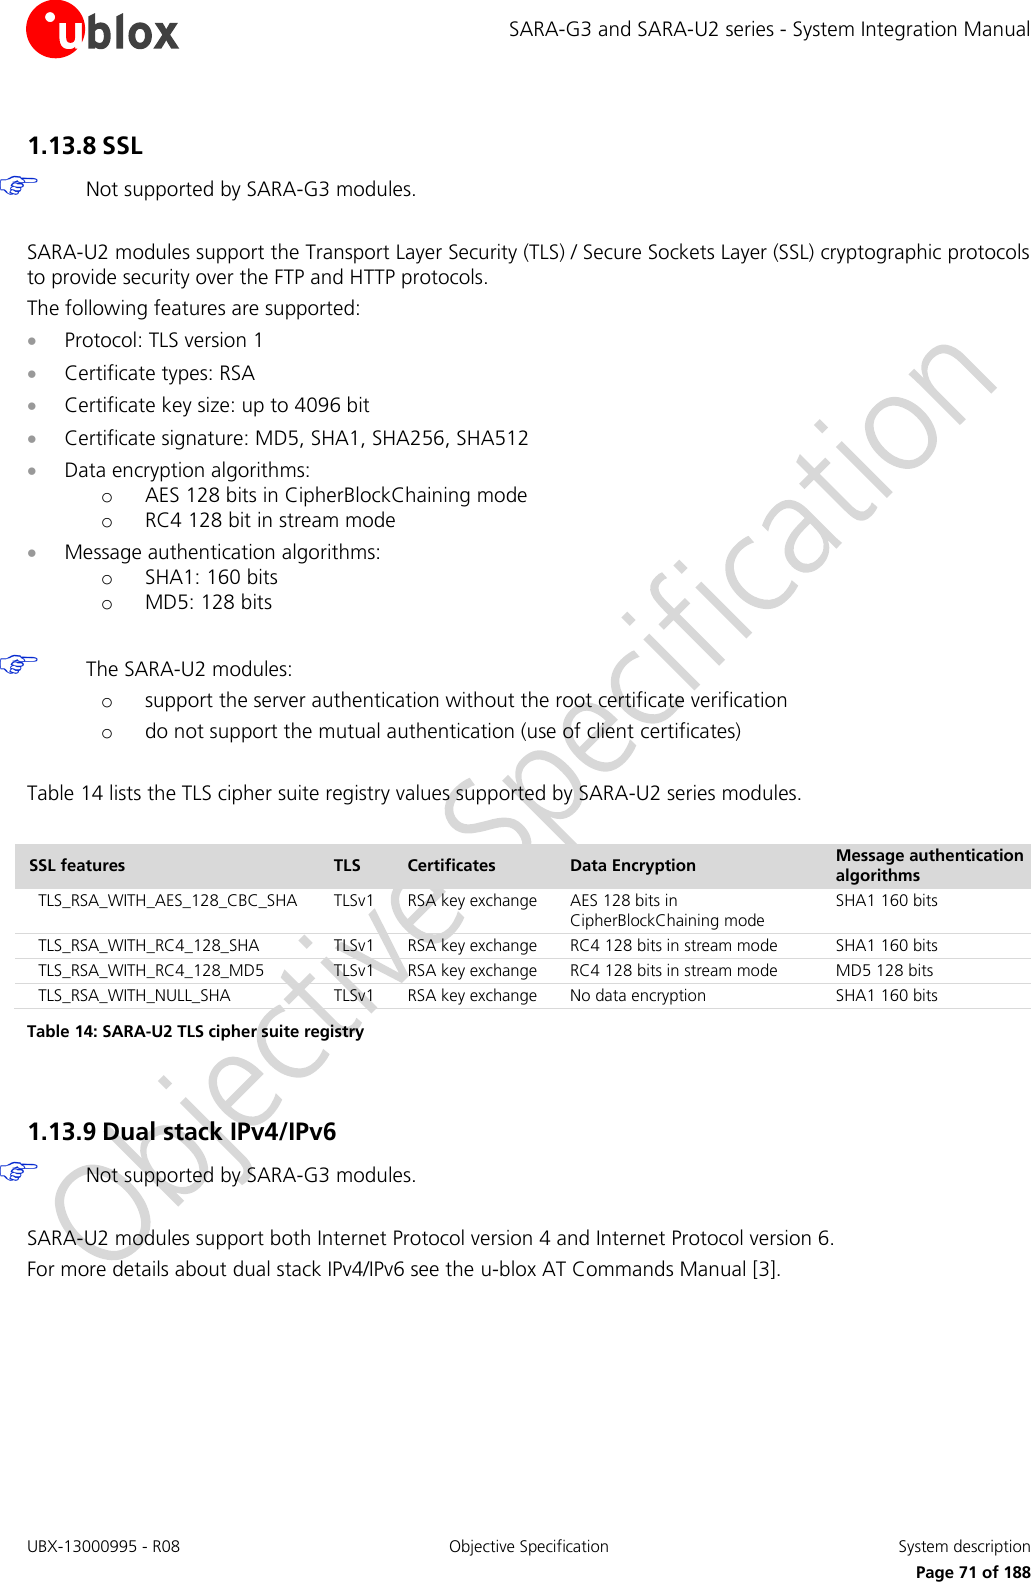 SARA-G3 and SARA-U2 series - System Integration Manual UBX-13000995 - R08  Objective Specification  System description     Page 71 of 188 1.13.8 SSL  Not supported by SARA-G3 modules.  SARA-U2 modules support the Transport Layer Security (TLS) / Secure Sockets Layer (SSL) cryptographic protocols to provide security over the FTP and HTTP protocols. The following features are supported:  Protocol: TLS version 1  Certificate types: RSA  Certificate key size: up to 4096 bit  Certificate signature: MD5, SHA1, SHA256, SHA512  Data encryption algorithms: o AES 128 bits in CipherBlockChaining mode o RC4 128 bit in stream mode  Message authentication algorithms: o SHA1: 160 bits o MD5: 128 bits   The SARA-U2 modules: o support the server authentication without the root certificate verification o do not support the mutual authentication (use of client certificates)  Table 14 lists the TLS cipher suite registry values supported by SARA-U2 series modules.  SSL features TLS Certificates Data Encryption Message authentication algorithms TLS_RSA_WITH_AES_128_CBC_SHA TLSv1 RSA key exchange AES 128 bits in CipherBlockChaining mode SHA1 160 bits TLS_RSA_WITH_RC4_128_SHA TLSv1 RSA key exchange RC4 128 bits in stream mode SHA1 160 bits TLS_RSA_WITH_RC4_128_MD5 TLSv1 RSA key exchange RC4 128 bits in stream mode MD5 128 bits TLS_RSA_WITH_NULL_SHA TLSv1 RSA key exchange No data encryption SHA1 160 bits Table 14: SARA-U2 TLS cipher suite registry  1.13.9 Dual stack IPv4/IPv6  Not supported by SARA-G3 modules.  SARA-U2 modules support both Internet Protocol version 4 and Internet Protocol version 6. For more details about dual stack IPv4/IPv6 see the u-blox AT Commands Manual [3].  